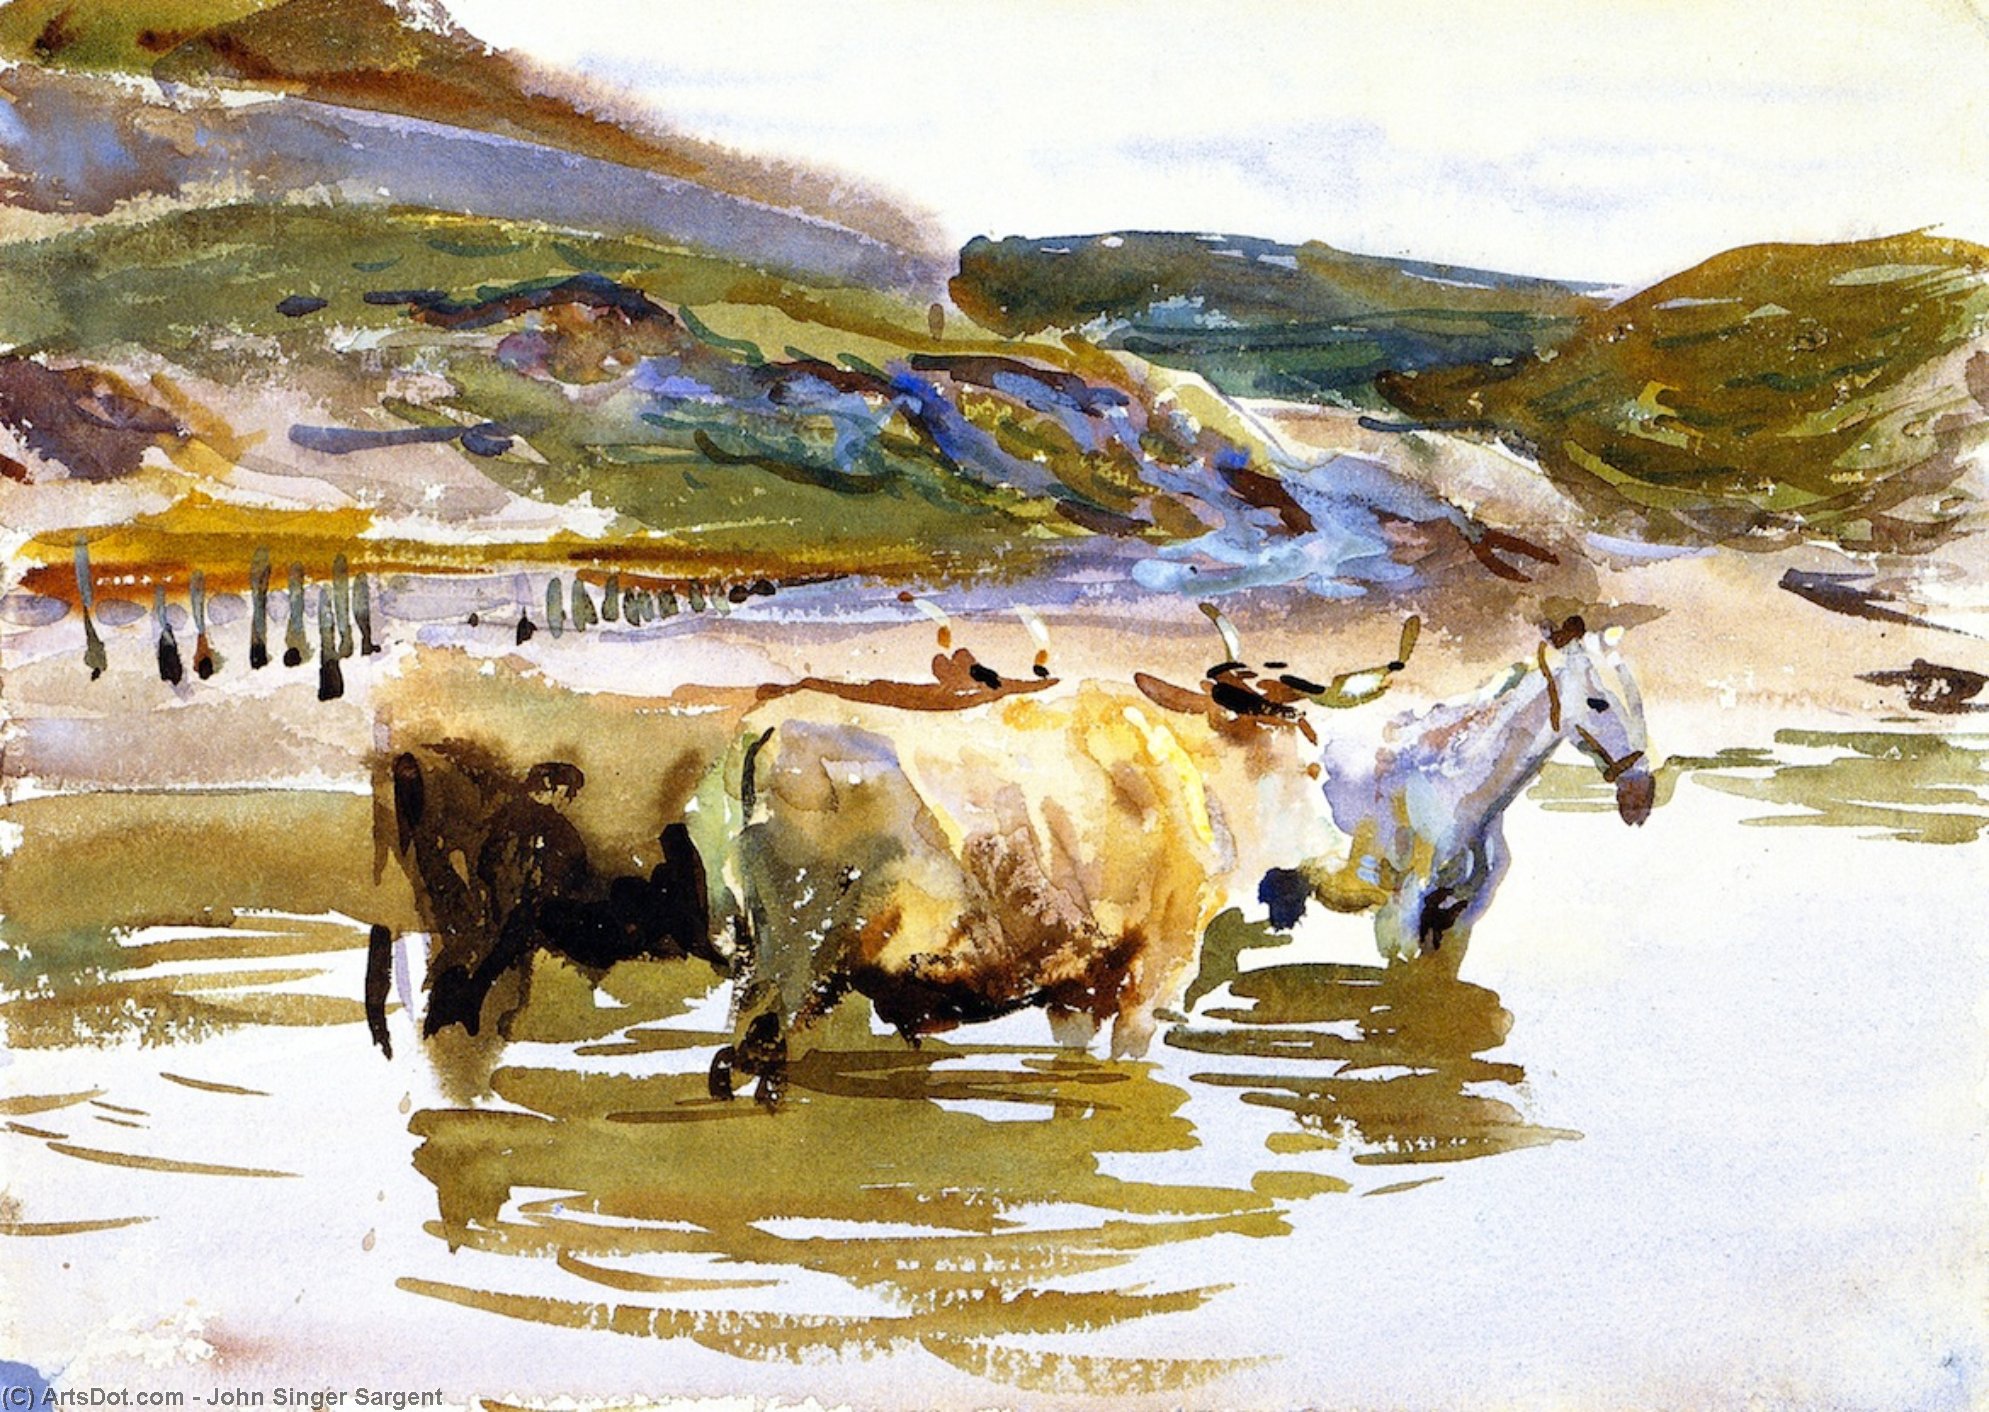 Wikoo.org - موسوعة الفنون الجميلة - اللوحة، العمل الفني John Singer Sargent - A Horse and Two Oxen at a Ford (also known as Oxen Crossing a Ford)